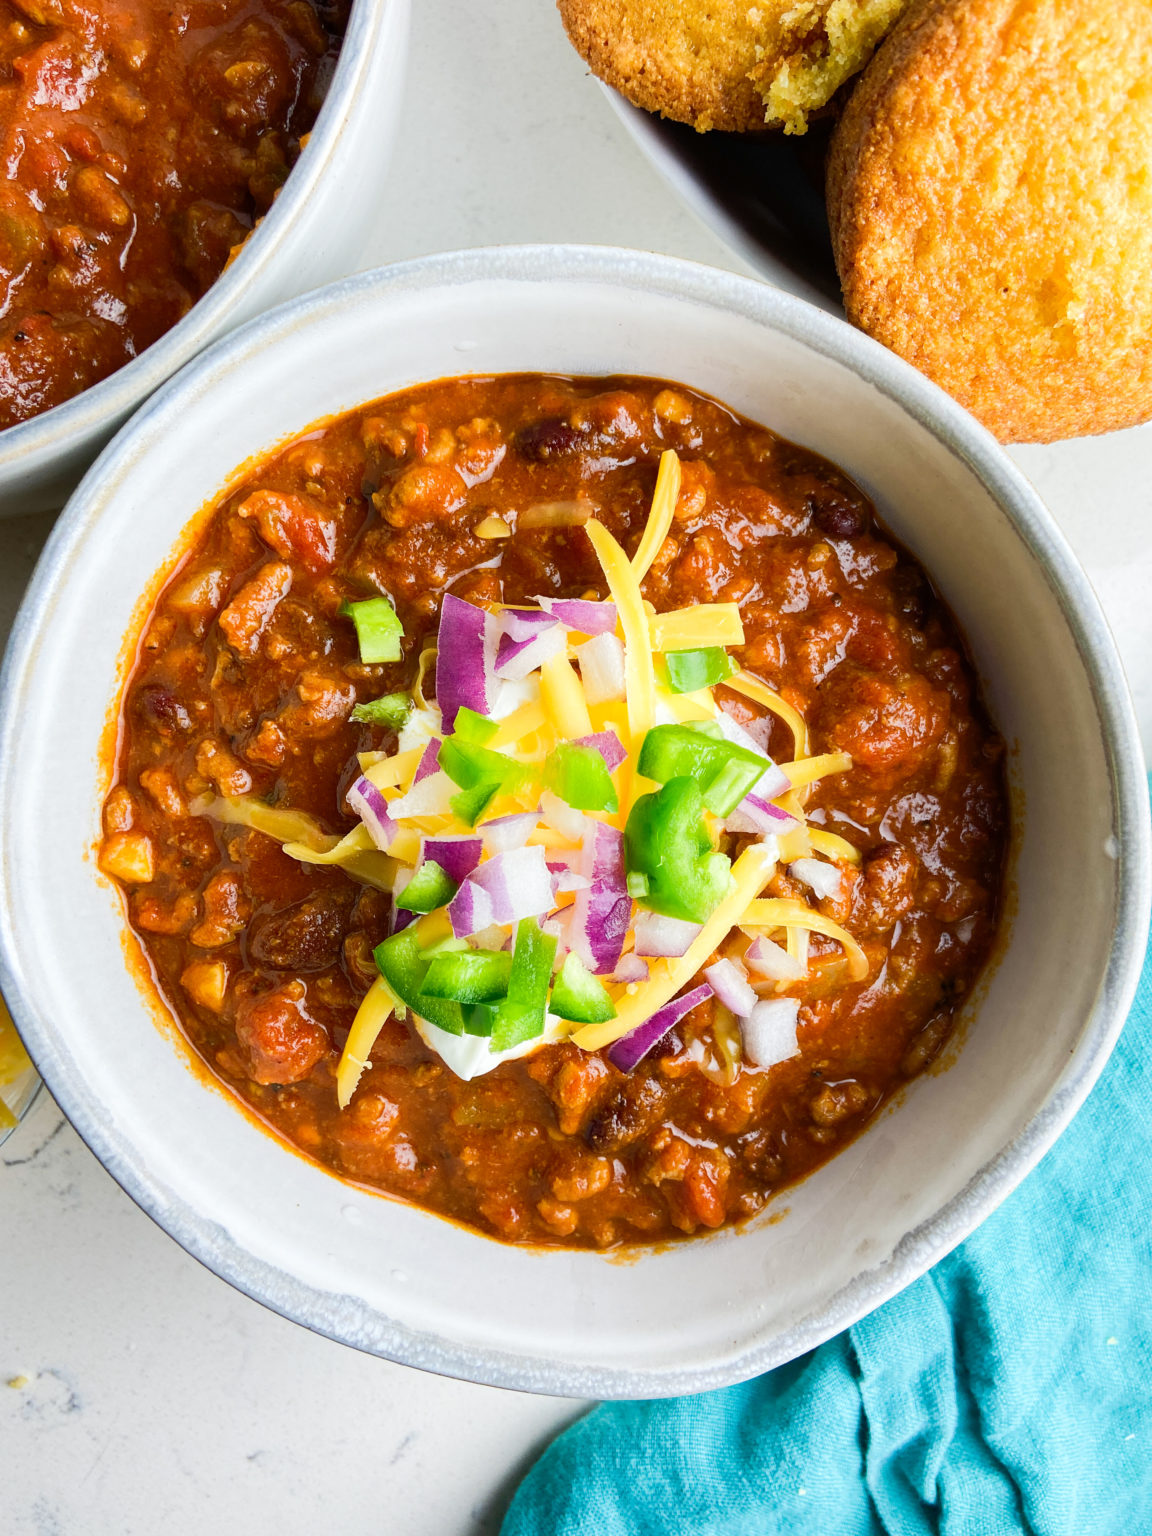 Easy Beef Chili Recipe with Beans | Life's Ambrosia